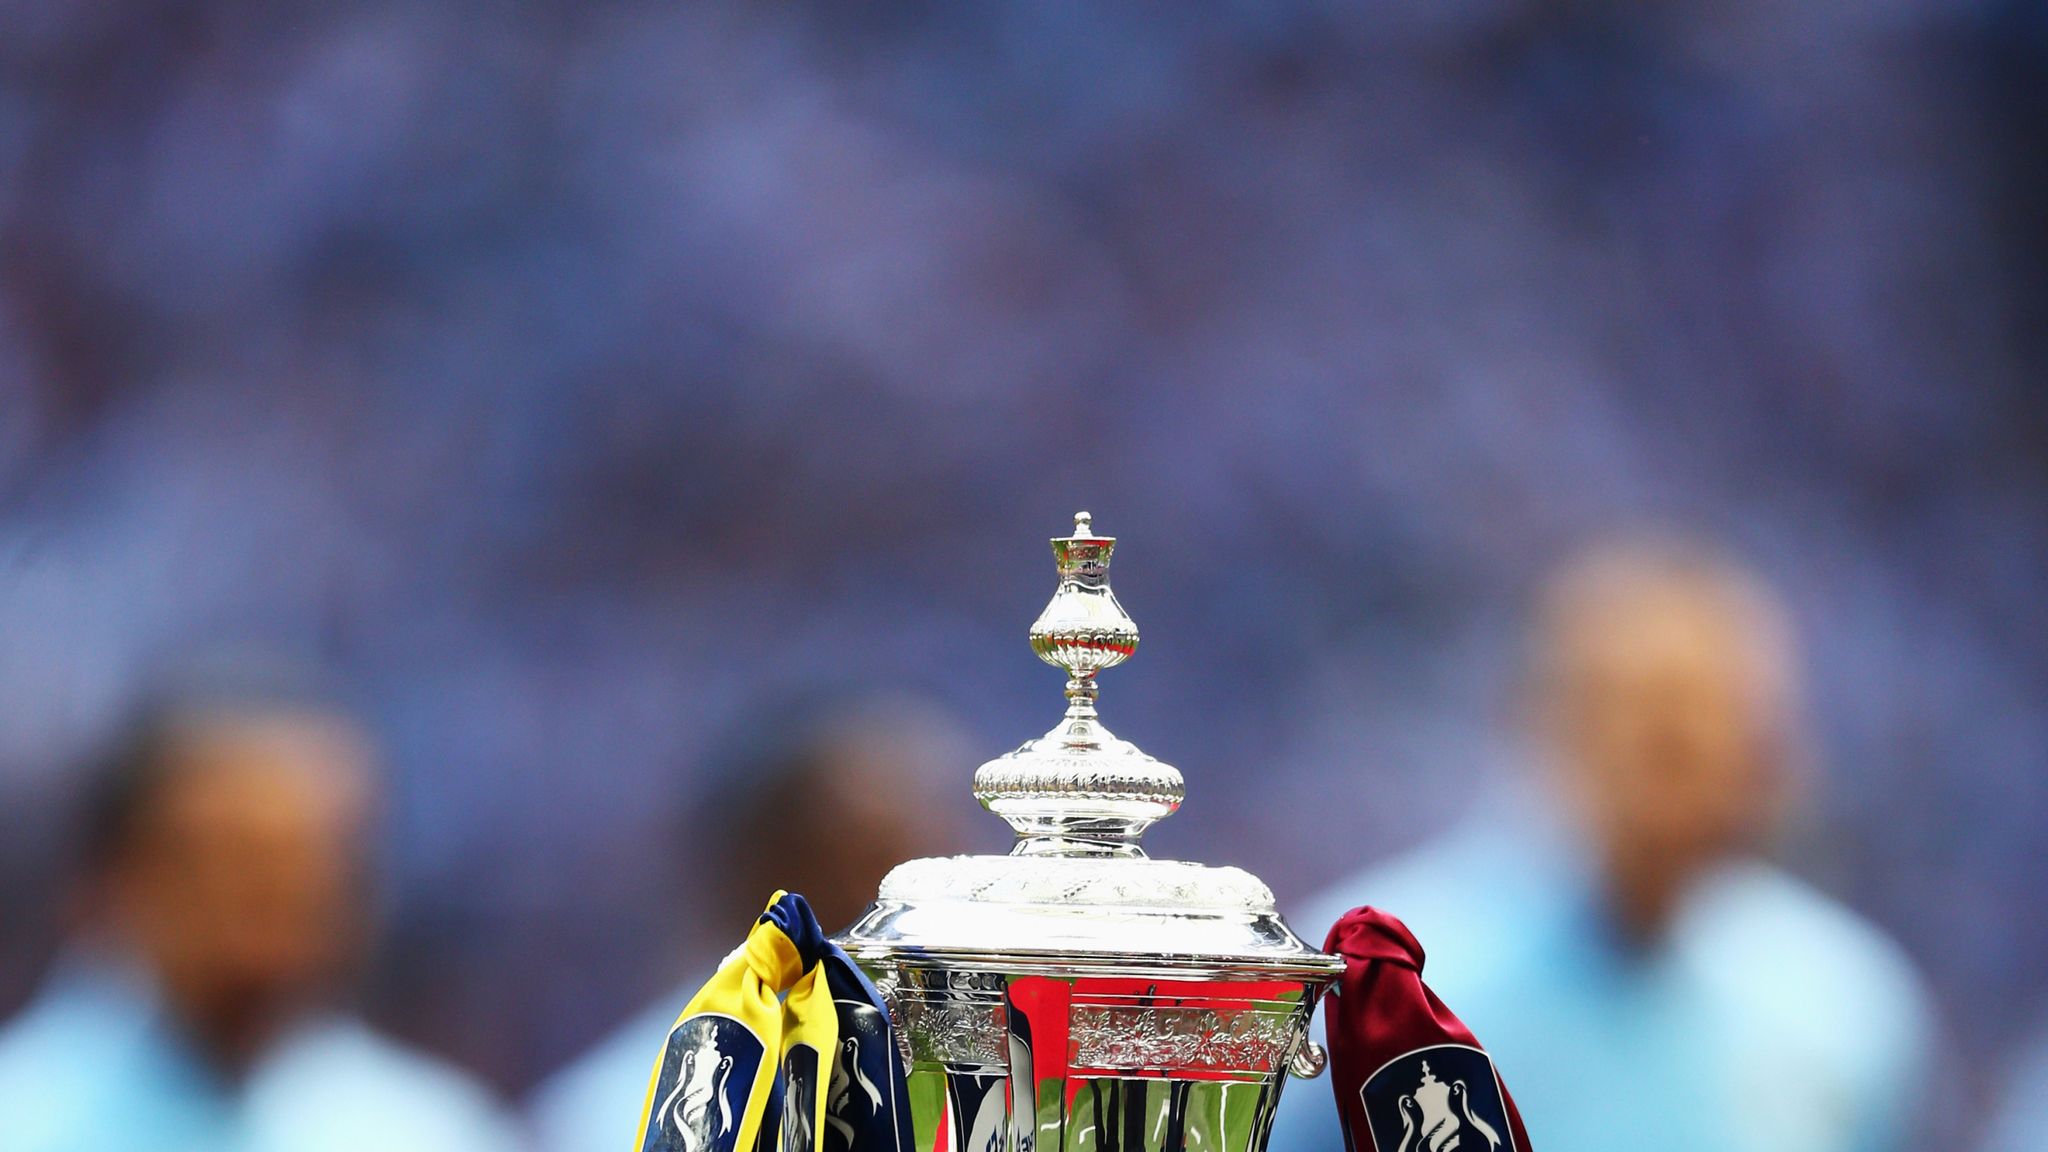 FA Cup semifinal dates and kickoff times confirmed Football News